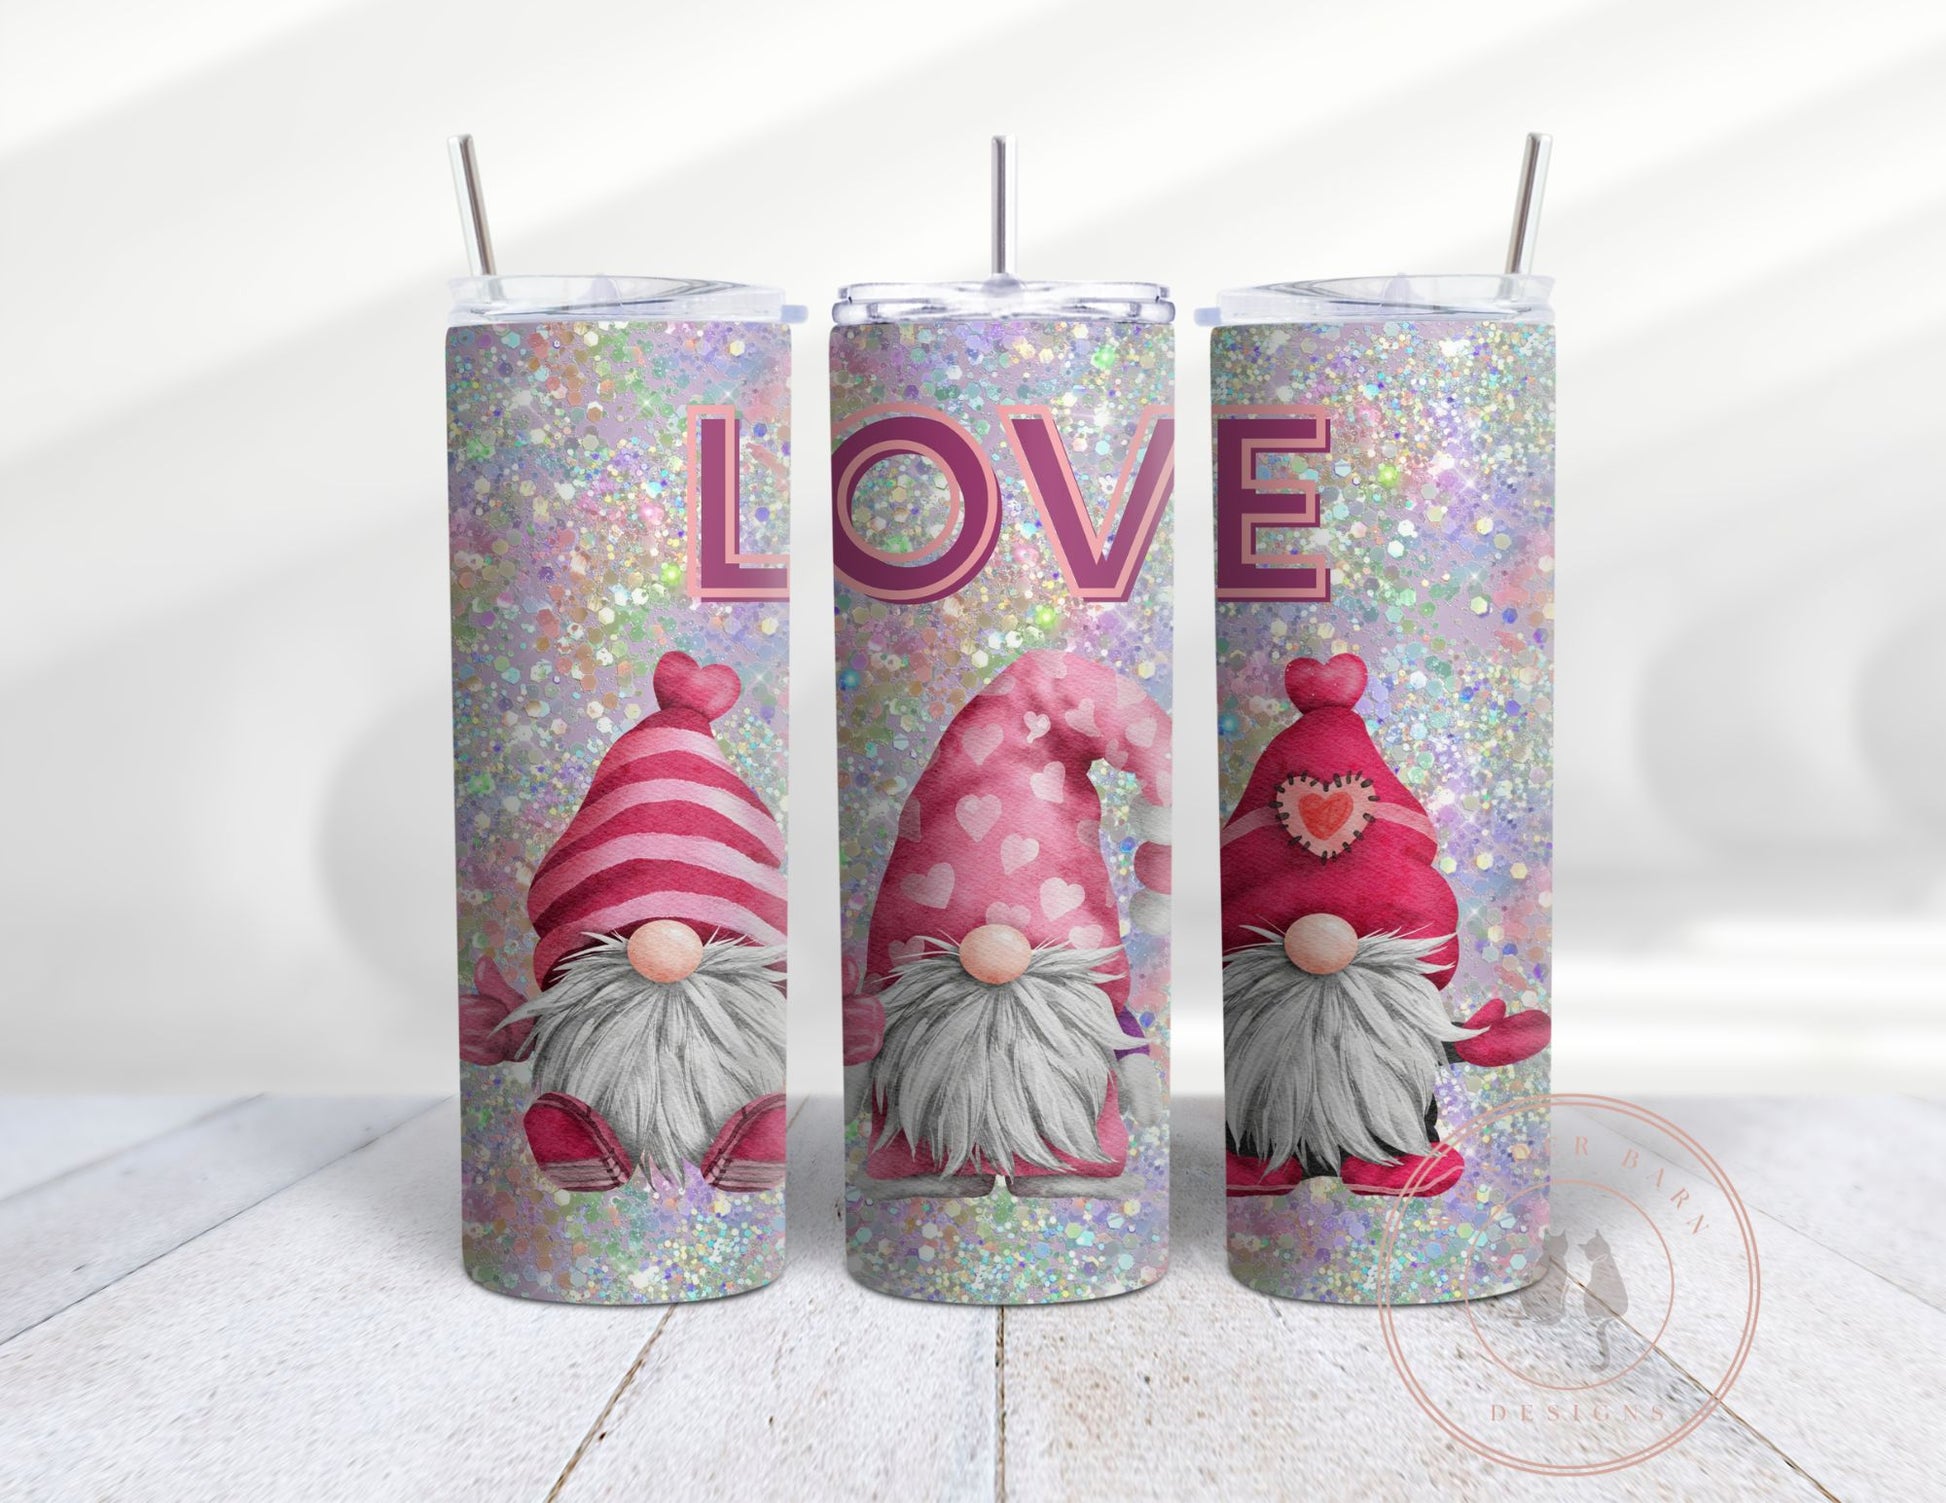 Pink Plaid Valentine Gnome 20oz Tumbler with Gift Box and Stainless Steel  Straw Made to Order! Fast Turnaround! Fast FREE Shipping!